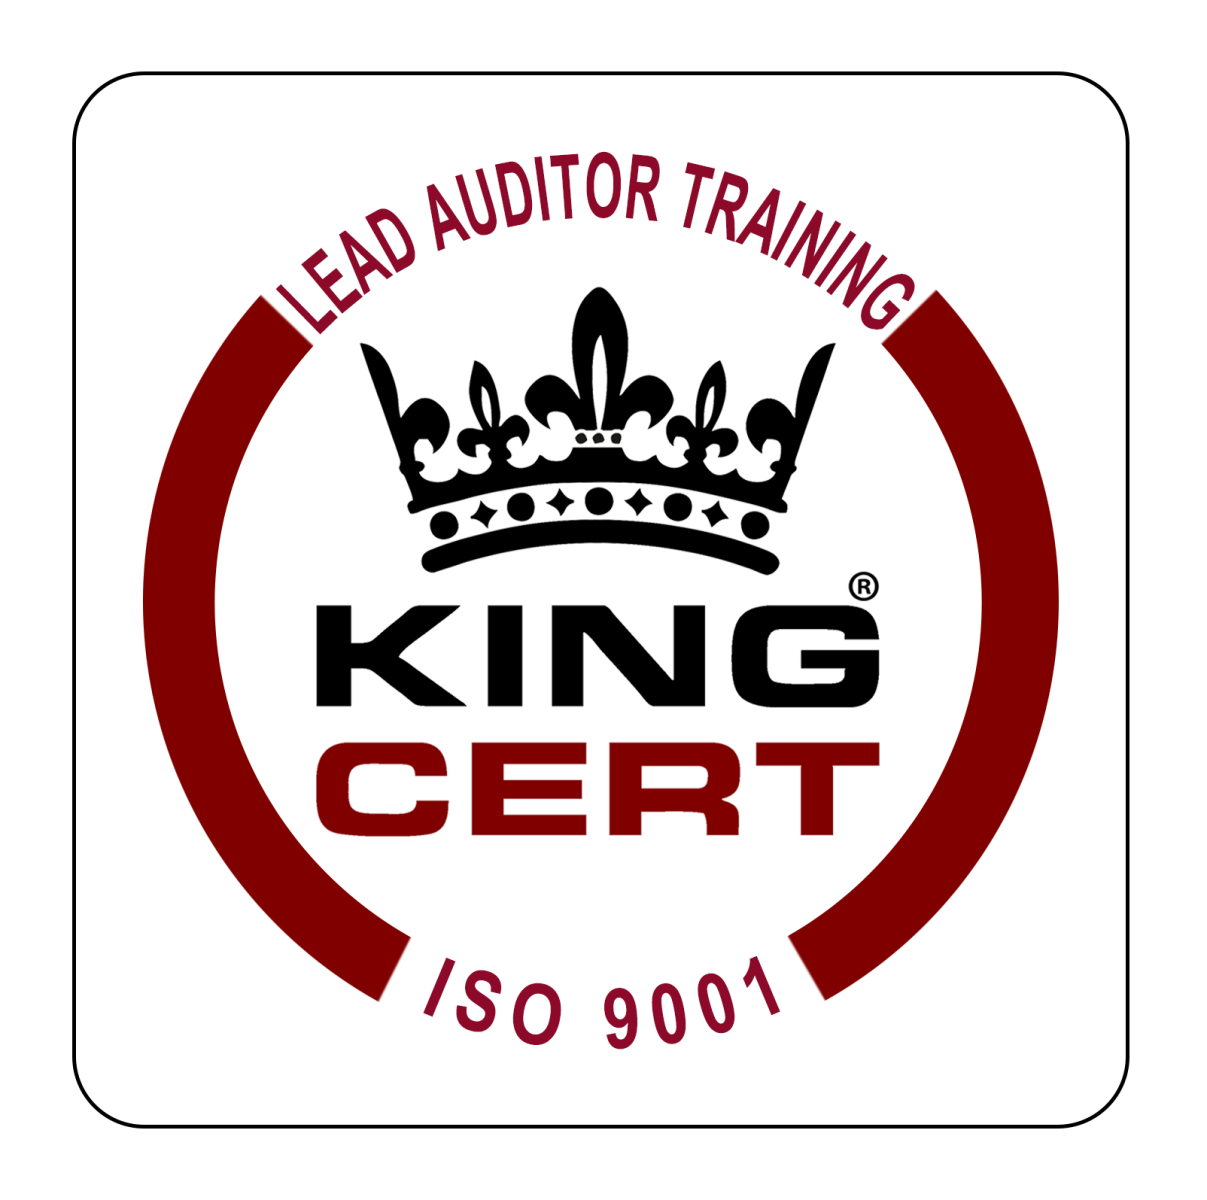 ISO 9001:2015 Quality Management System Lead Auditor Training